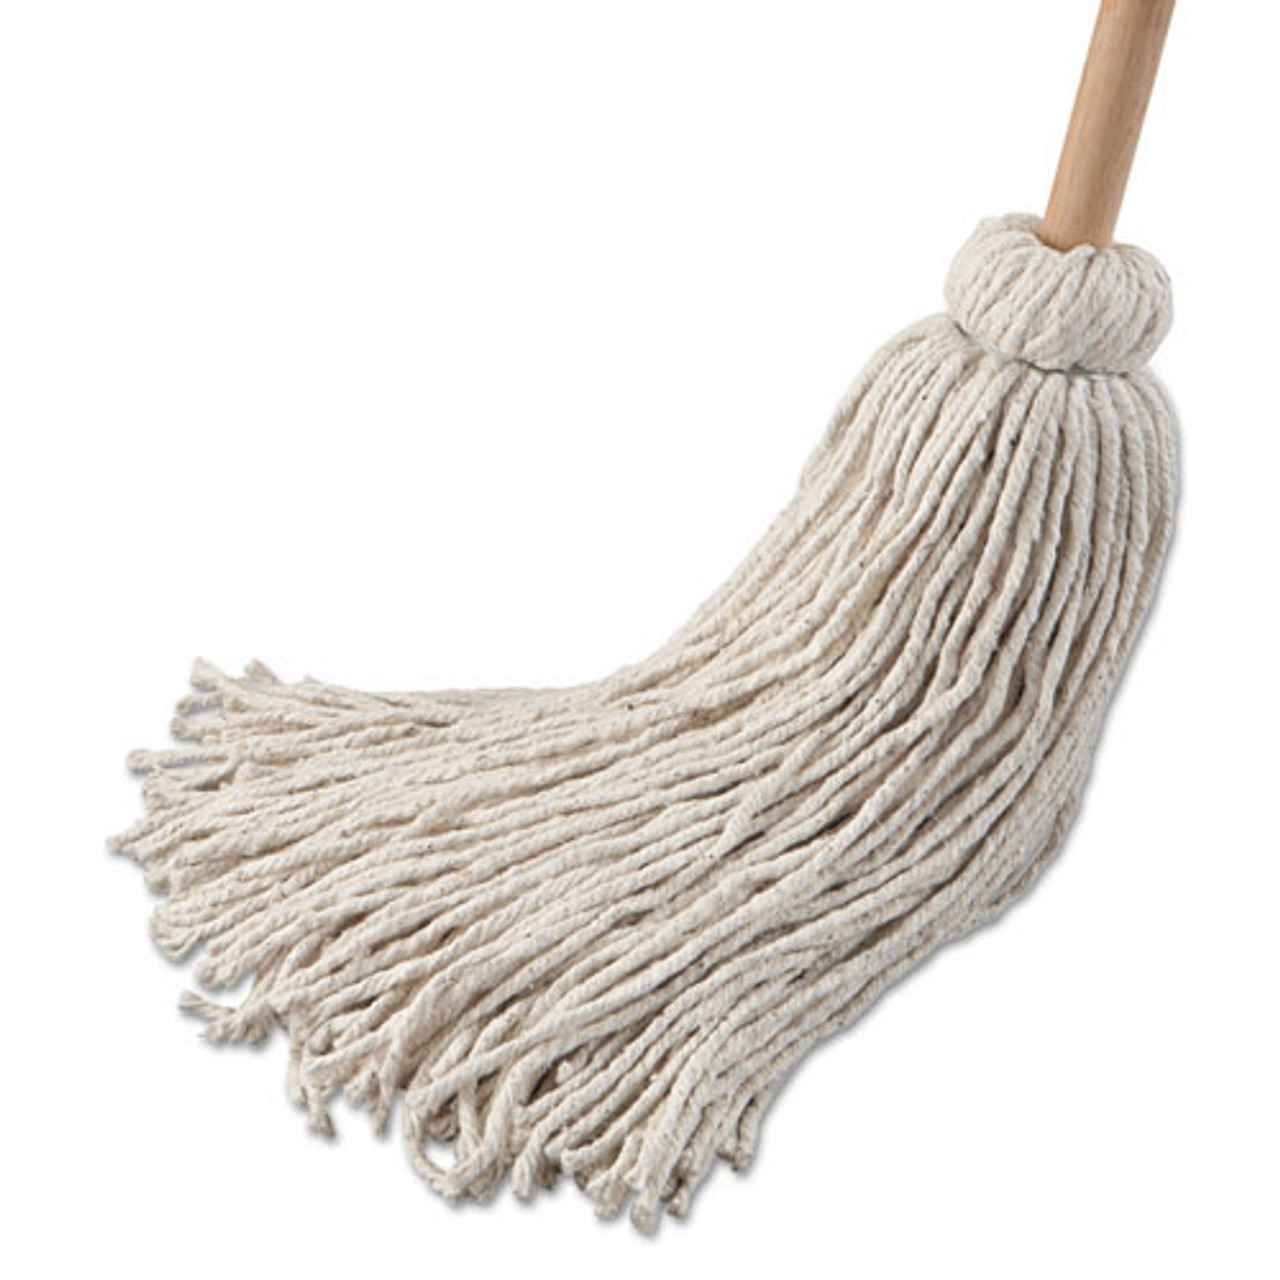  Tidy Tools Large Wet Deck Cotton Mop with Solid Wood